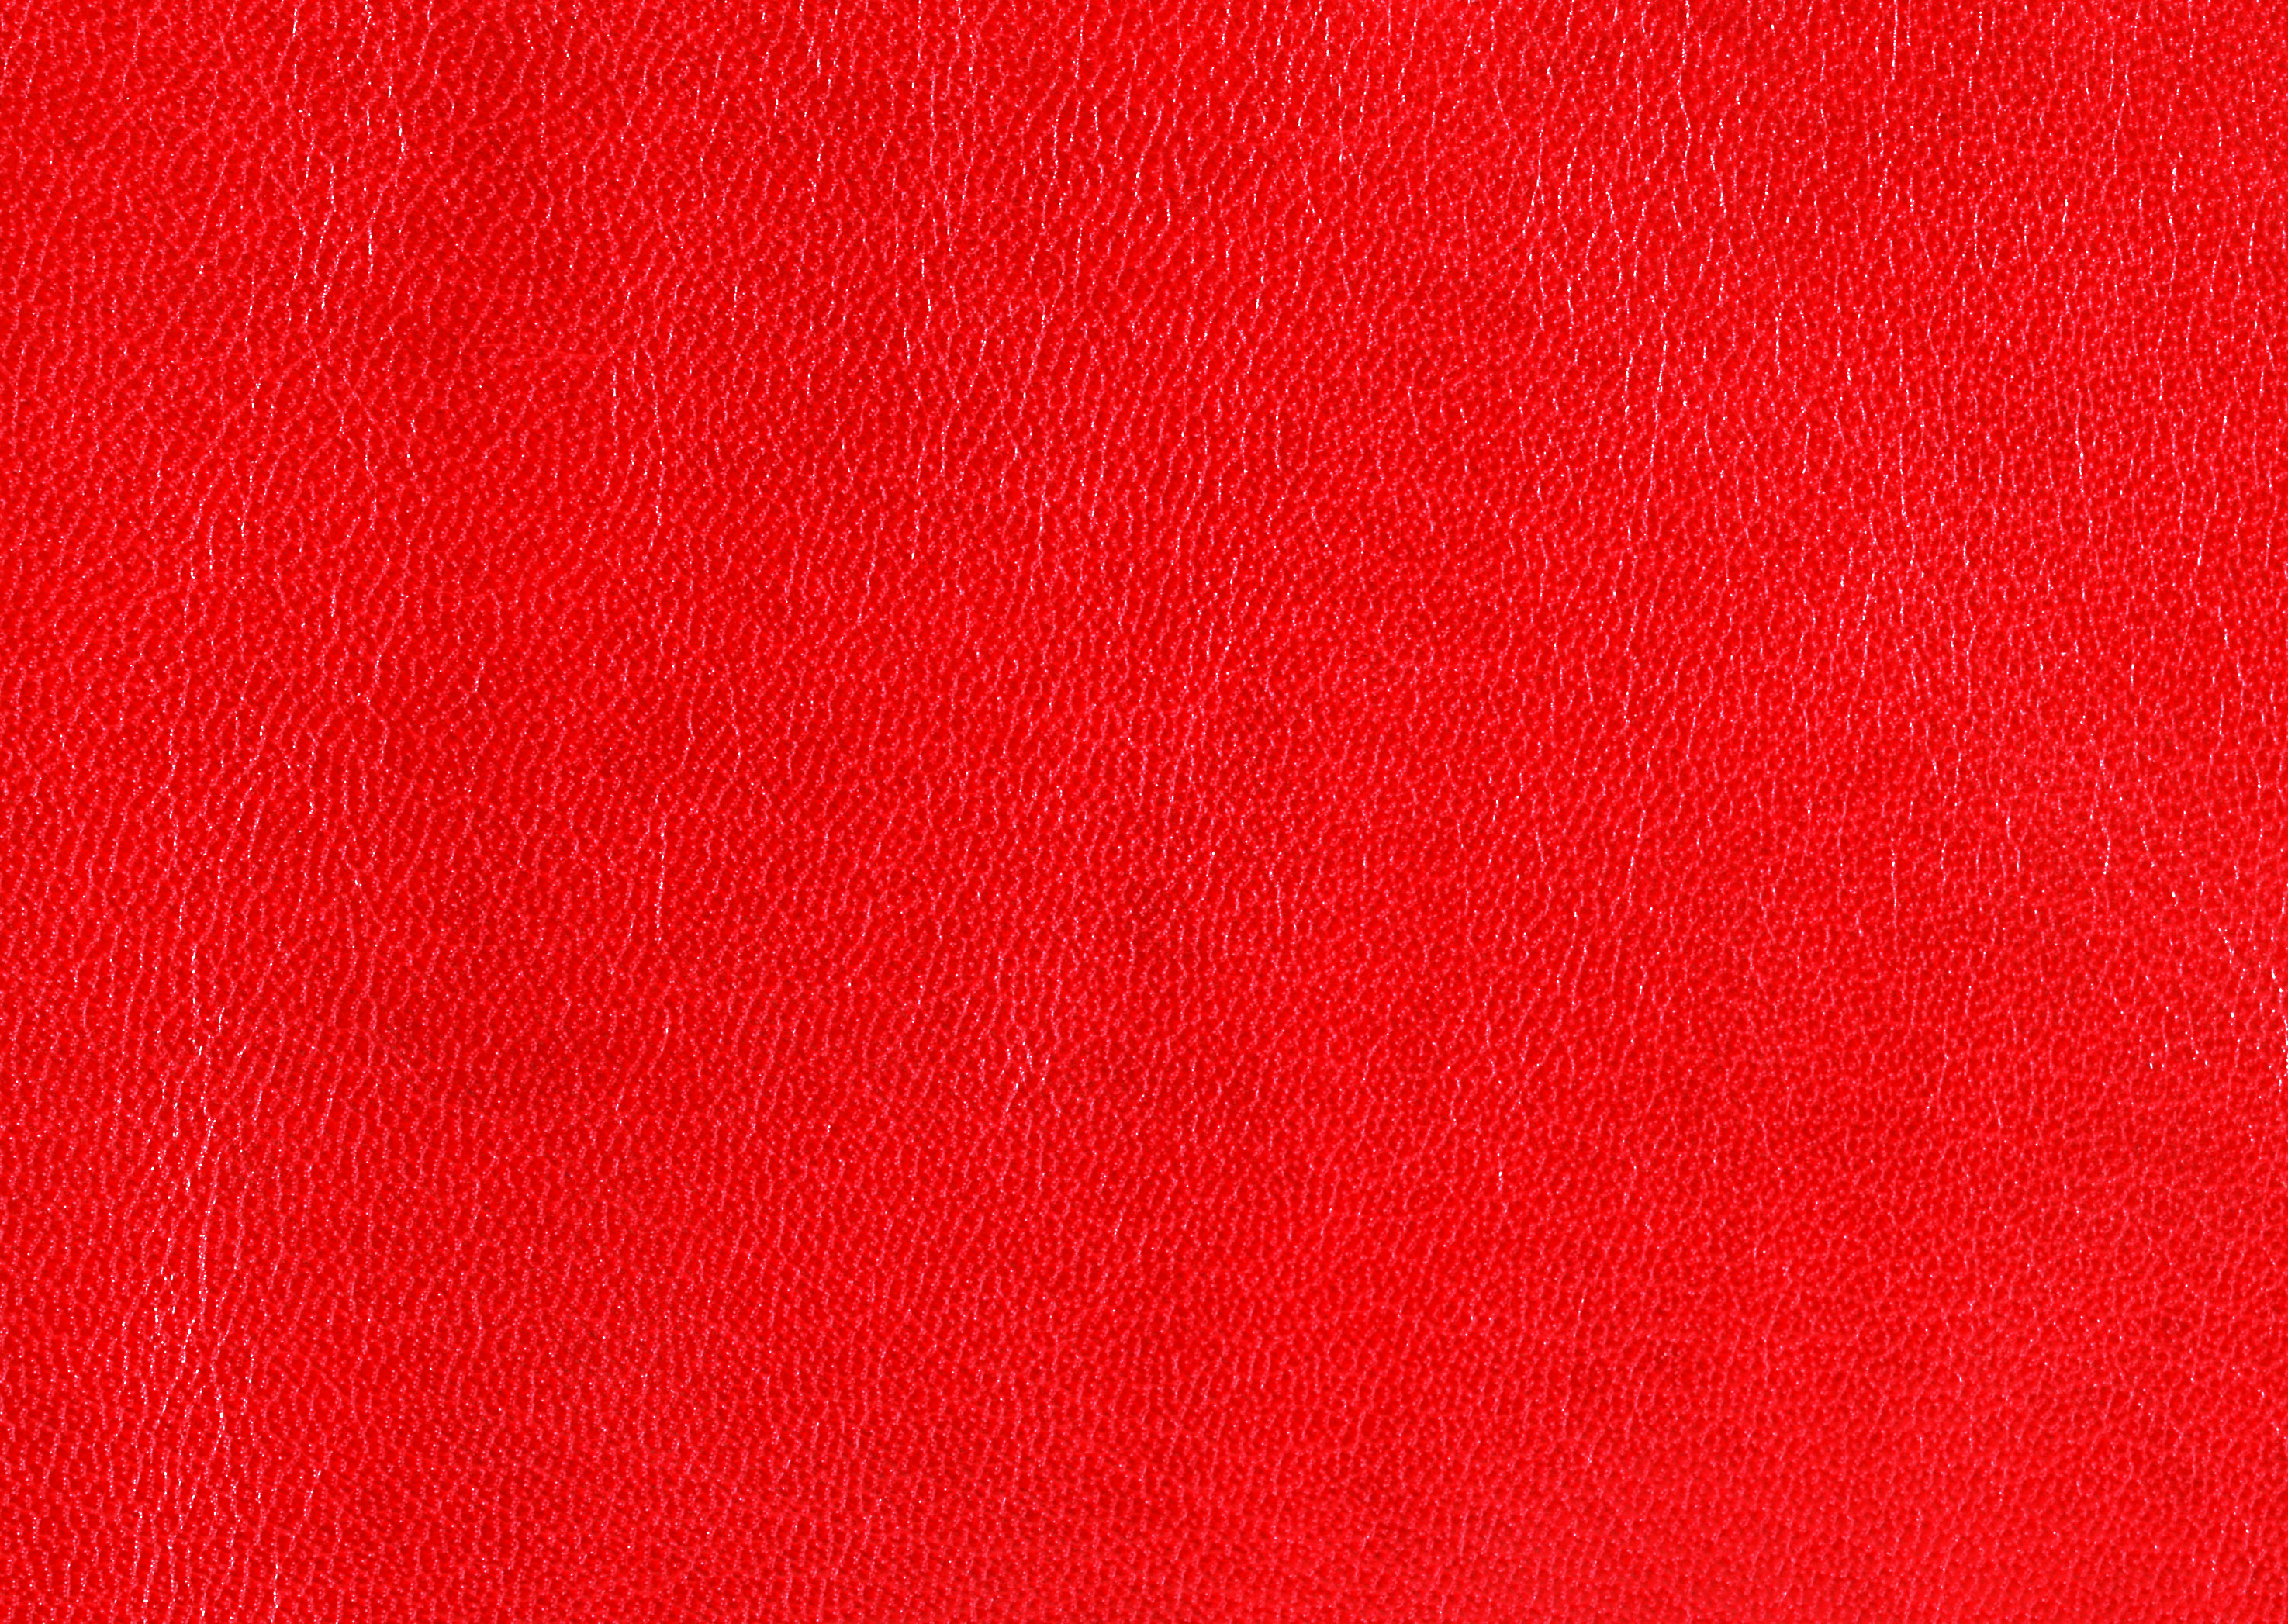 Red leather texture background image free download